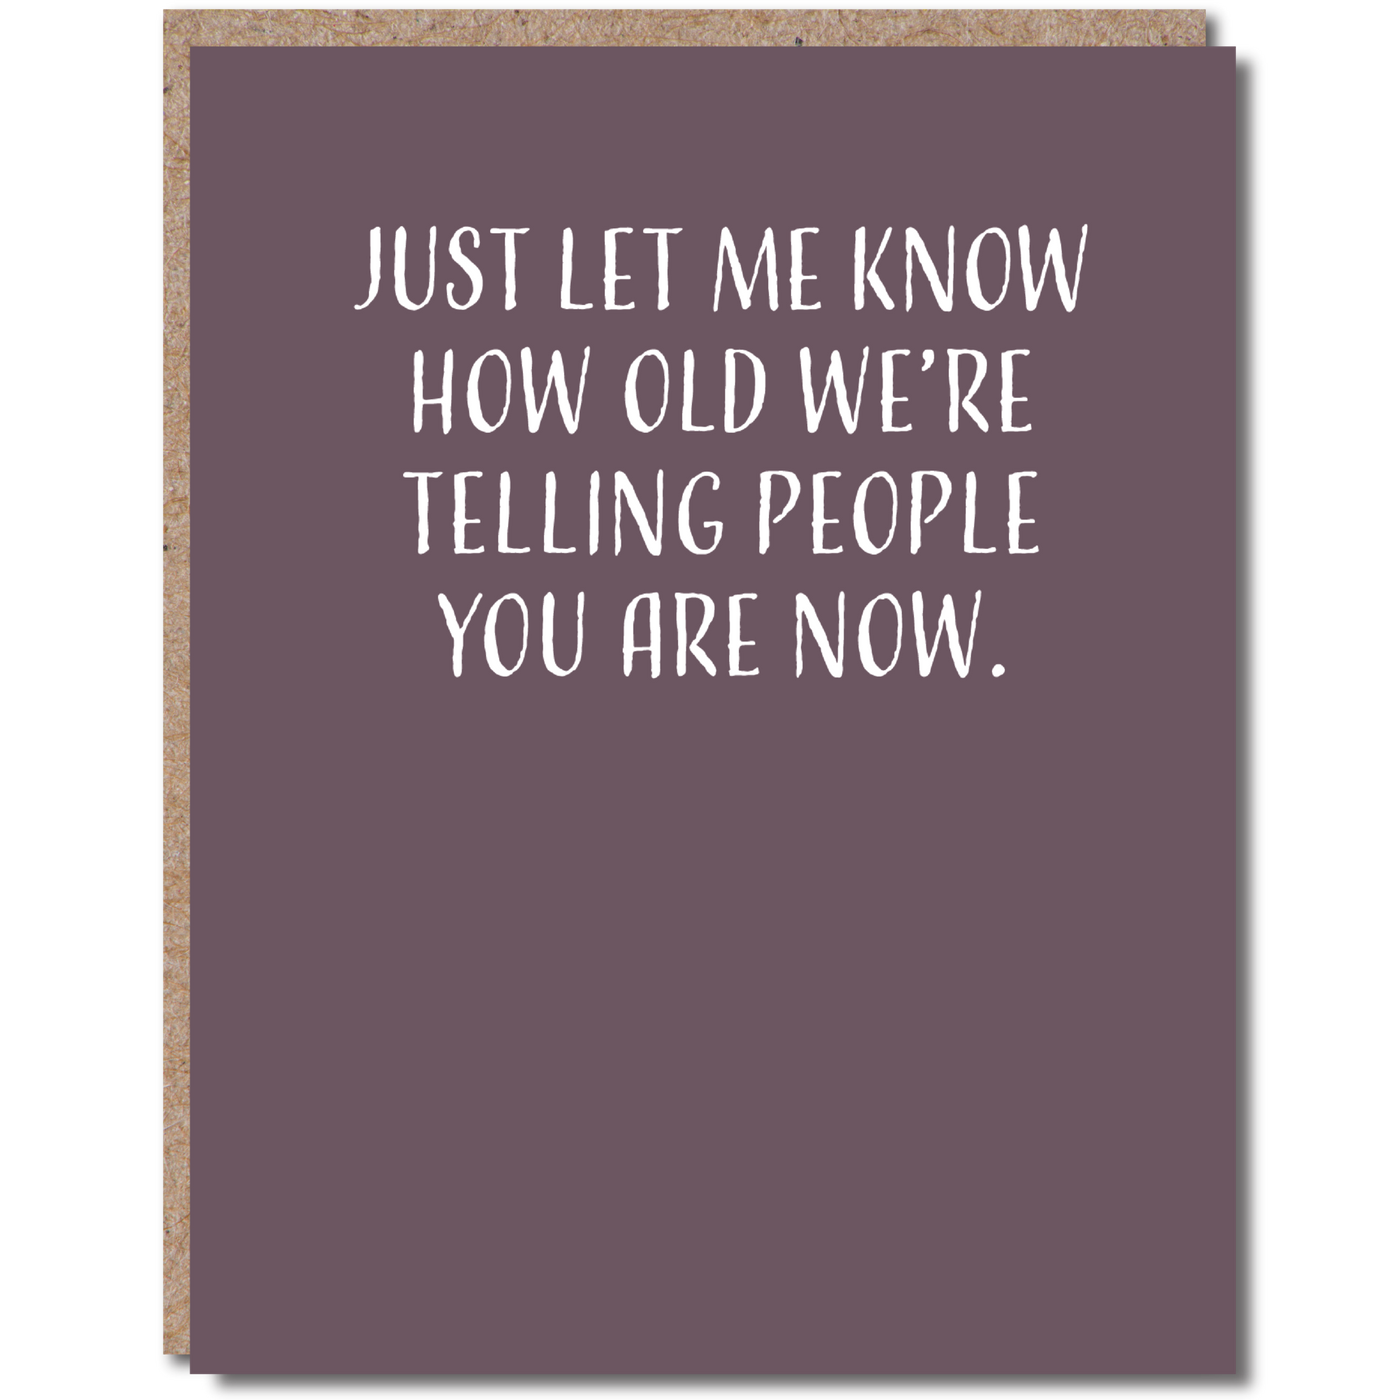 BIRTHDAY GREETING CARD "JUST LET ME KNOW HOW OLD WE'RE TELLING PEOPLE YOU ARE NOW"